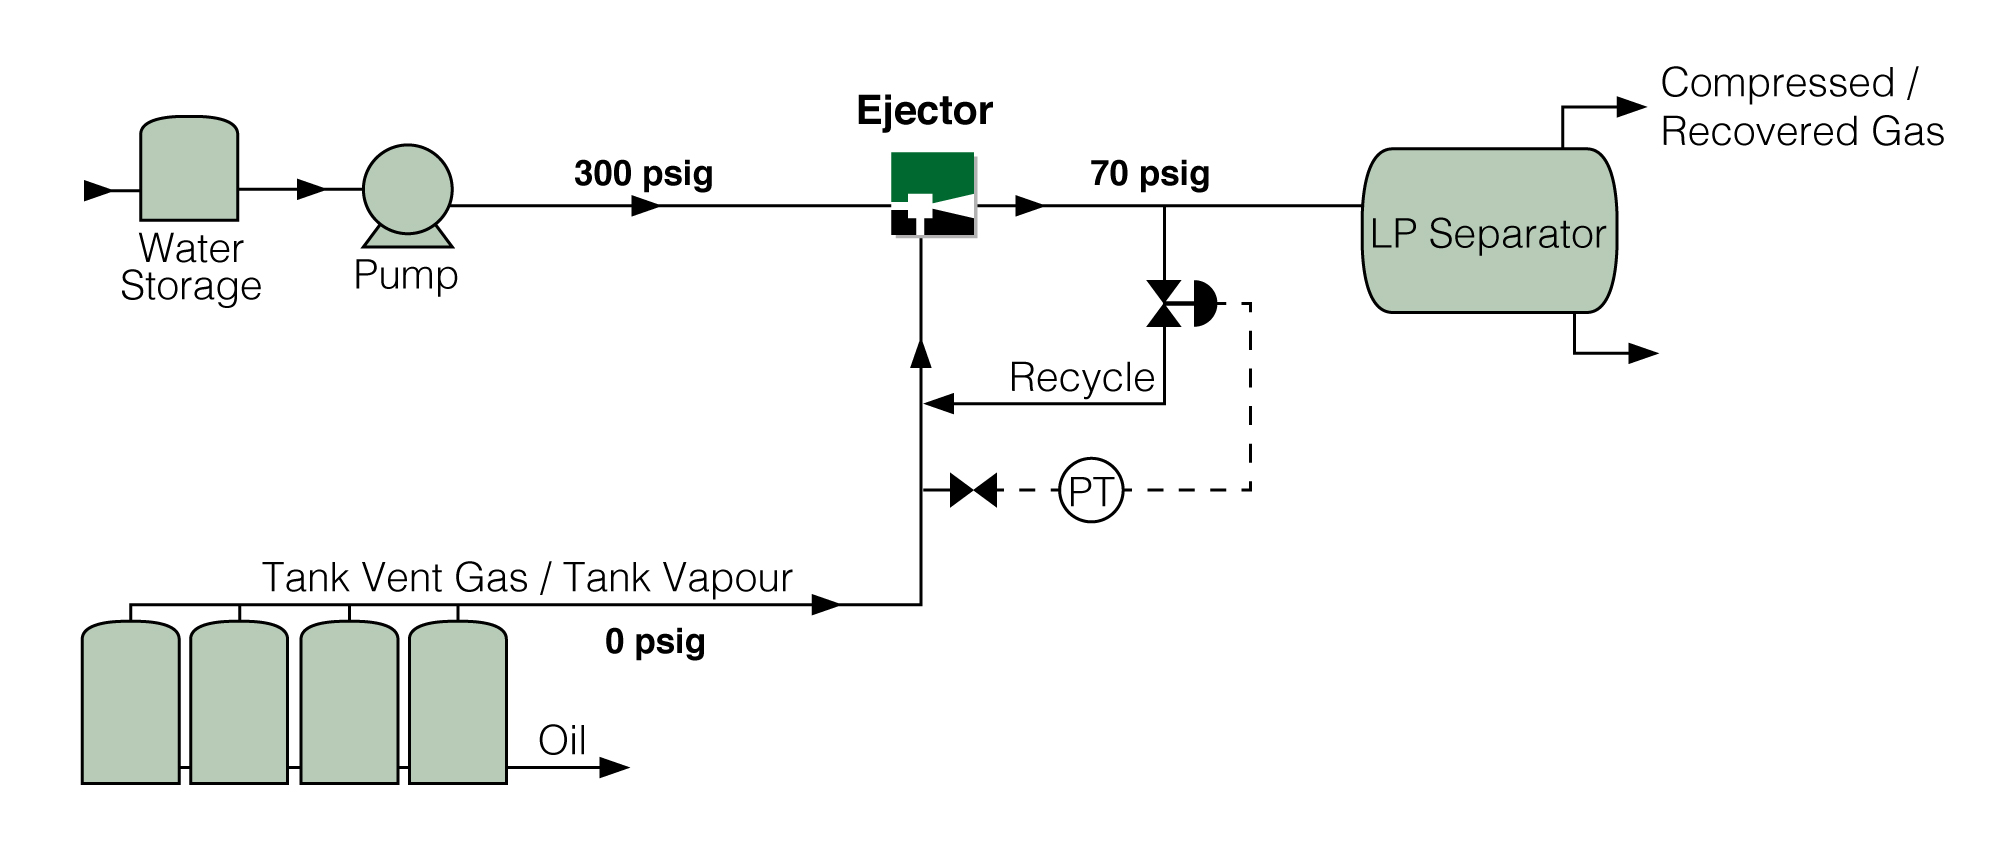 Tank Vent Gas Recovery using Ejectors